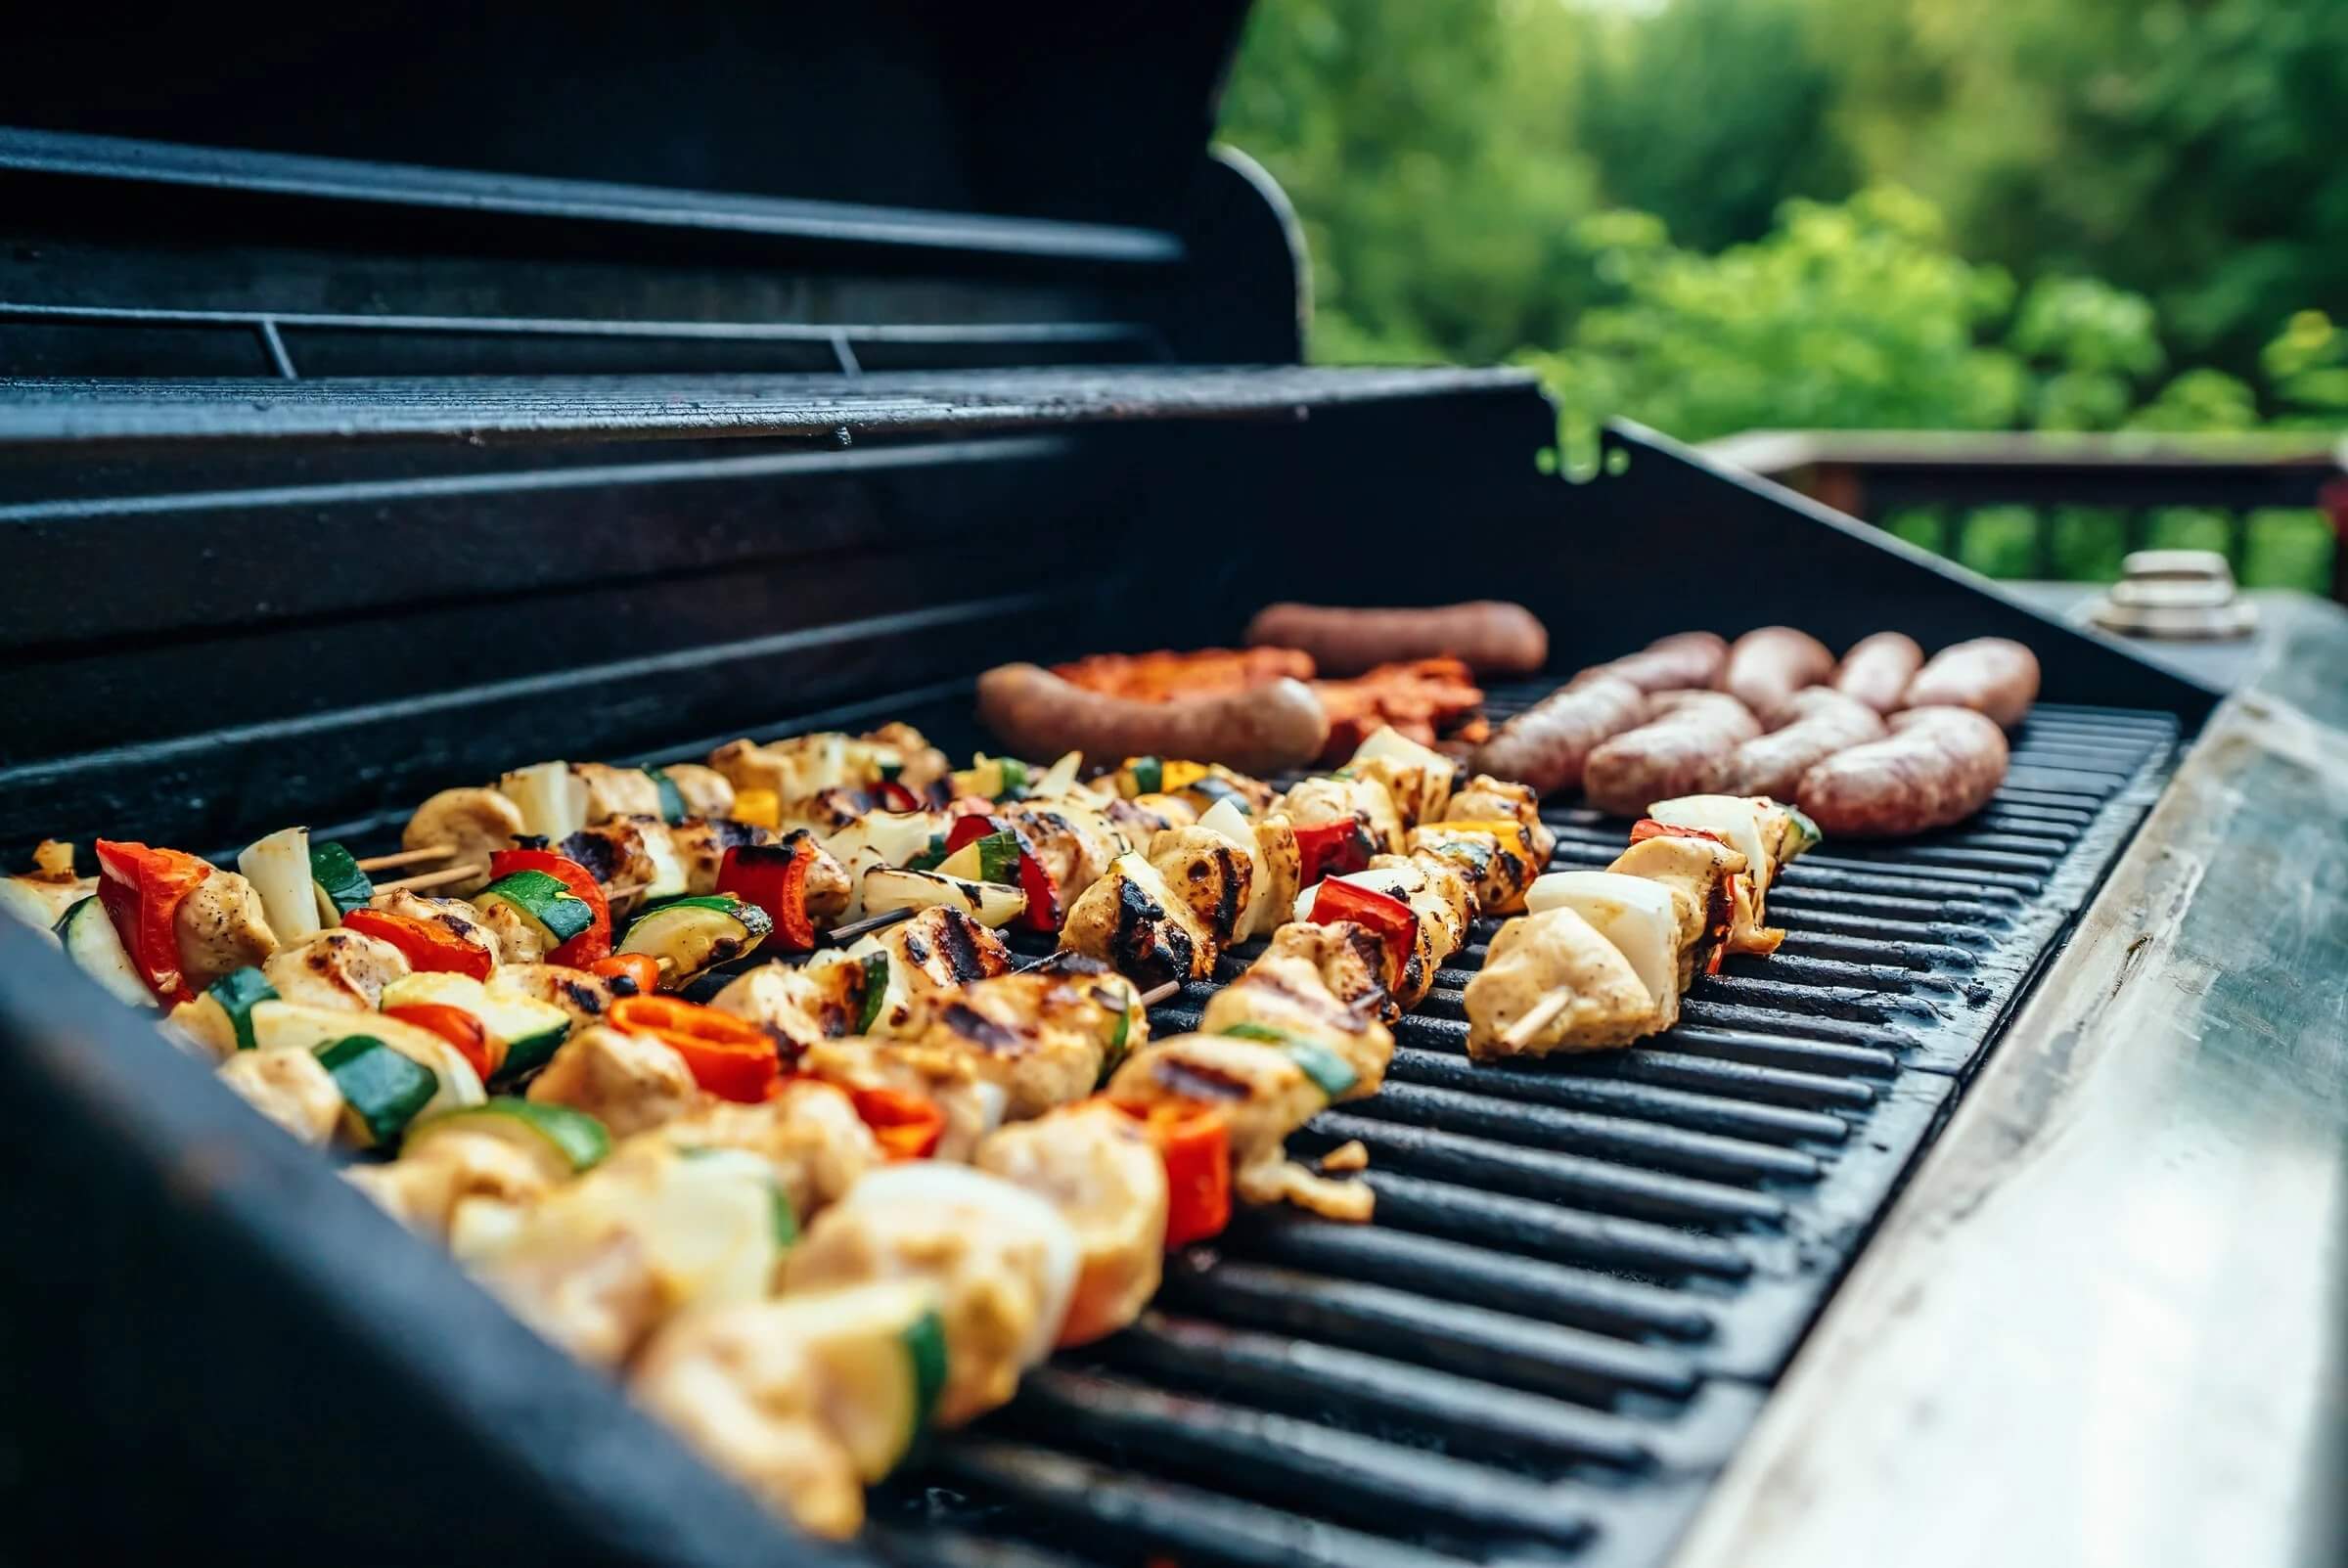 A sizzling BBQ with chicken kebabs and sausages cooking